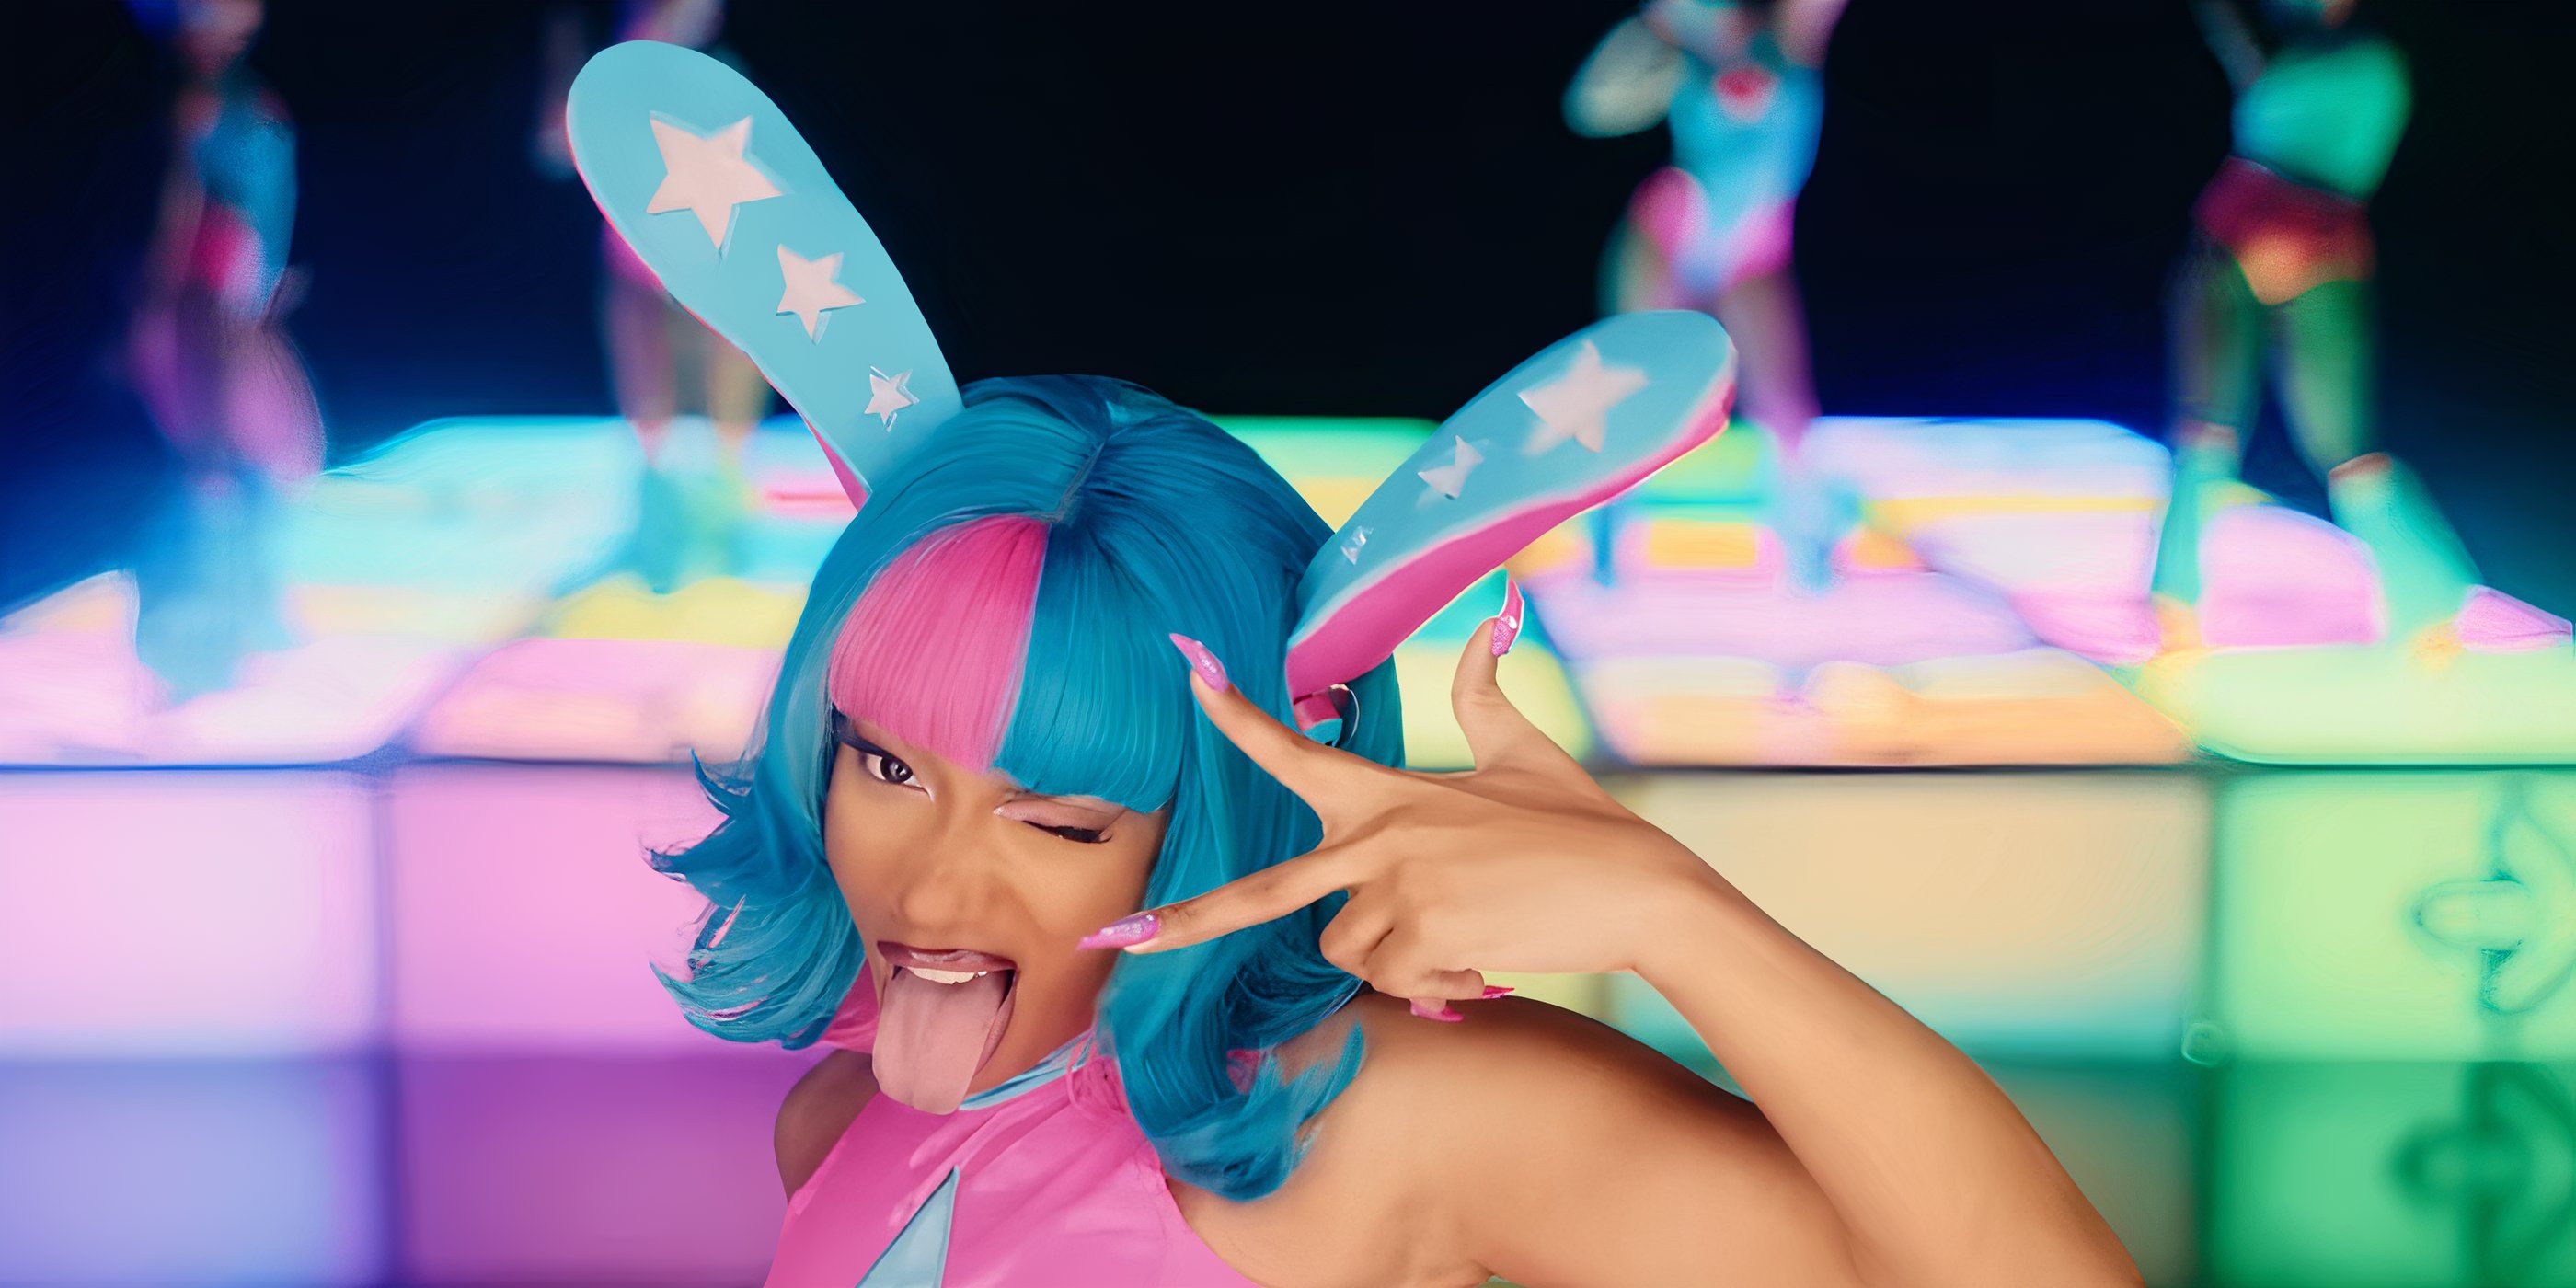 Megan thee Stallion pays homage to Dance Dance Revolution in her music video for "BOA".